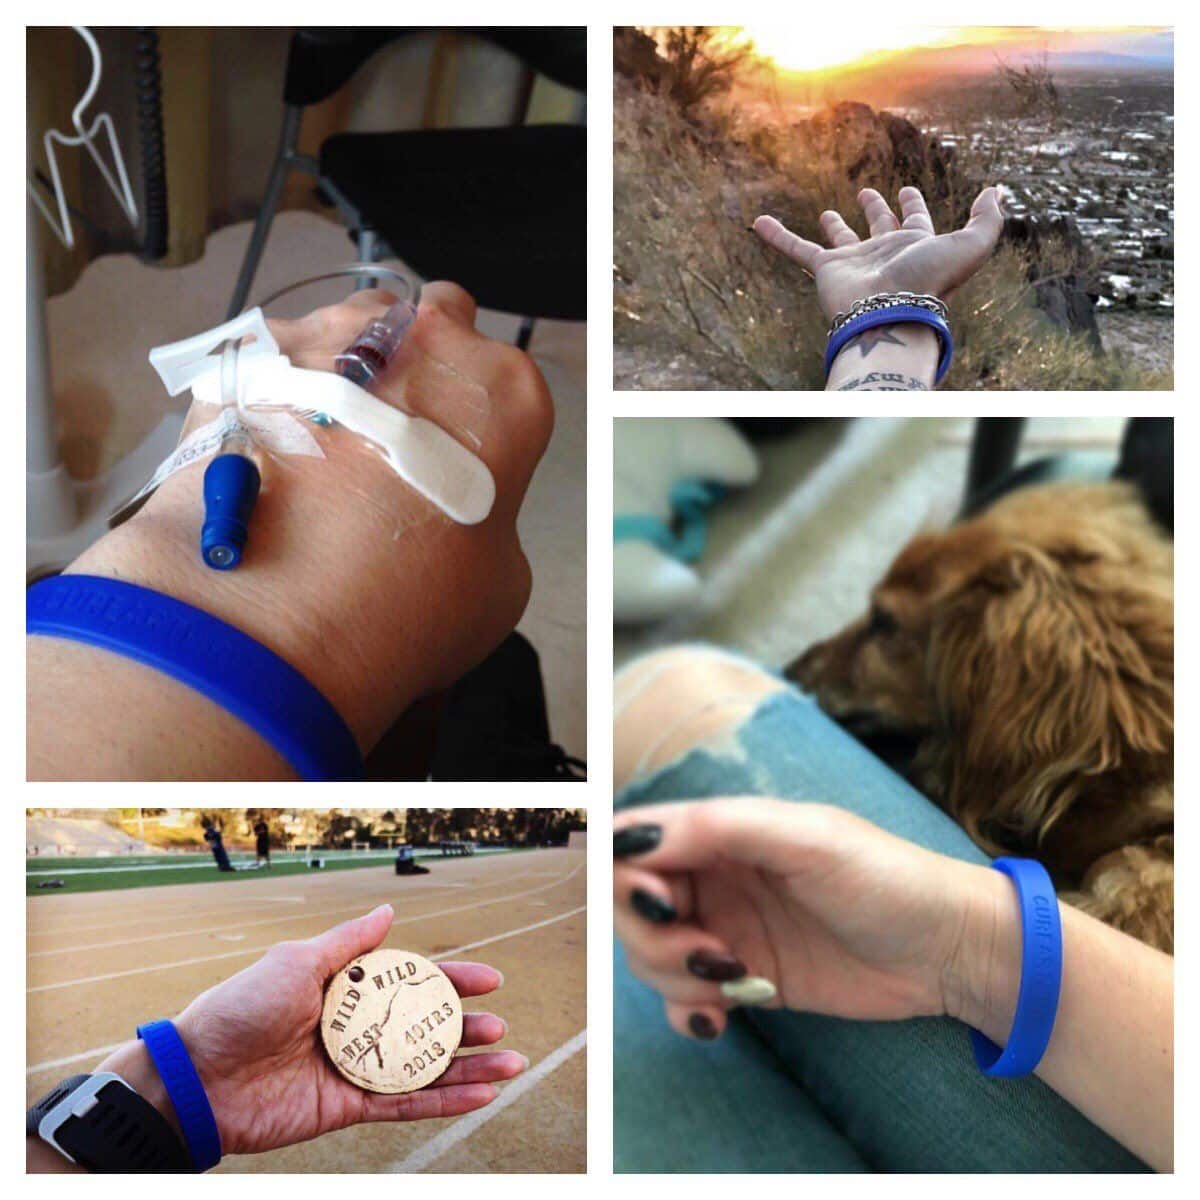 Every photo, tweet, text or conversation about #arthritis helps bring ...